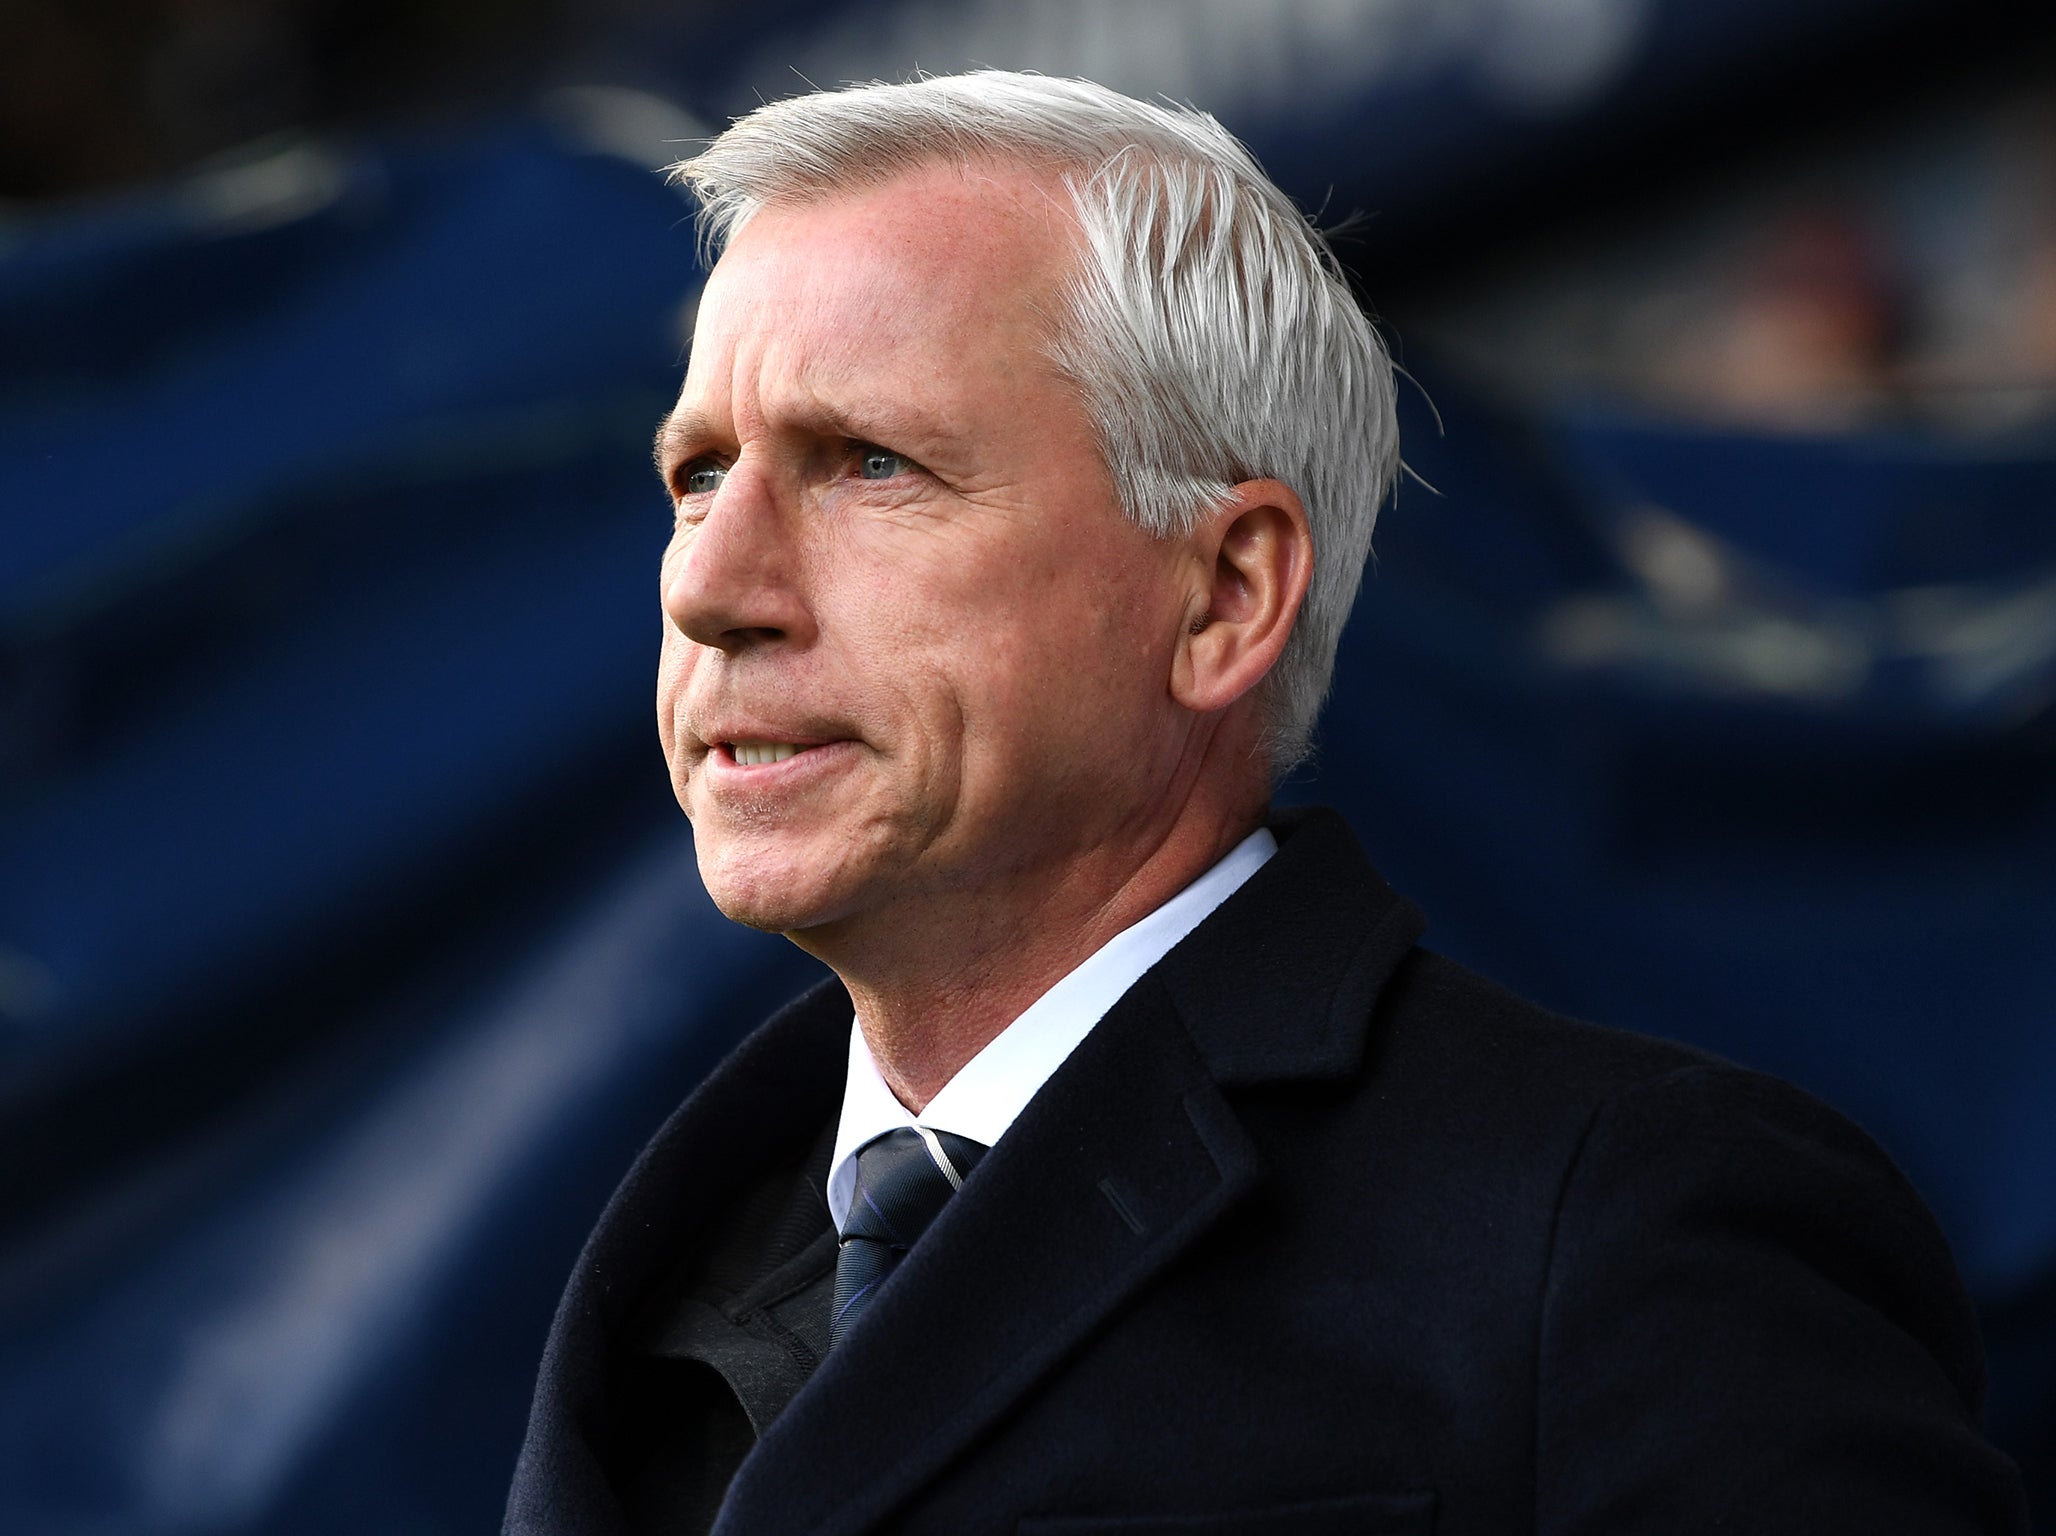 Albion fans told Pardew he'd be 'sacked in the morning' as West Brom lost again